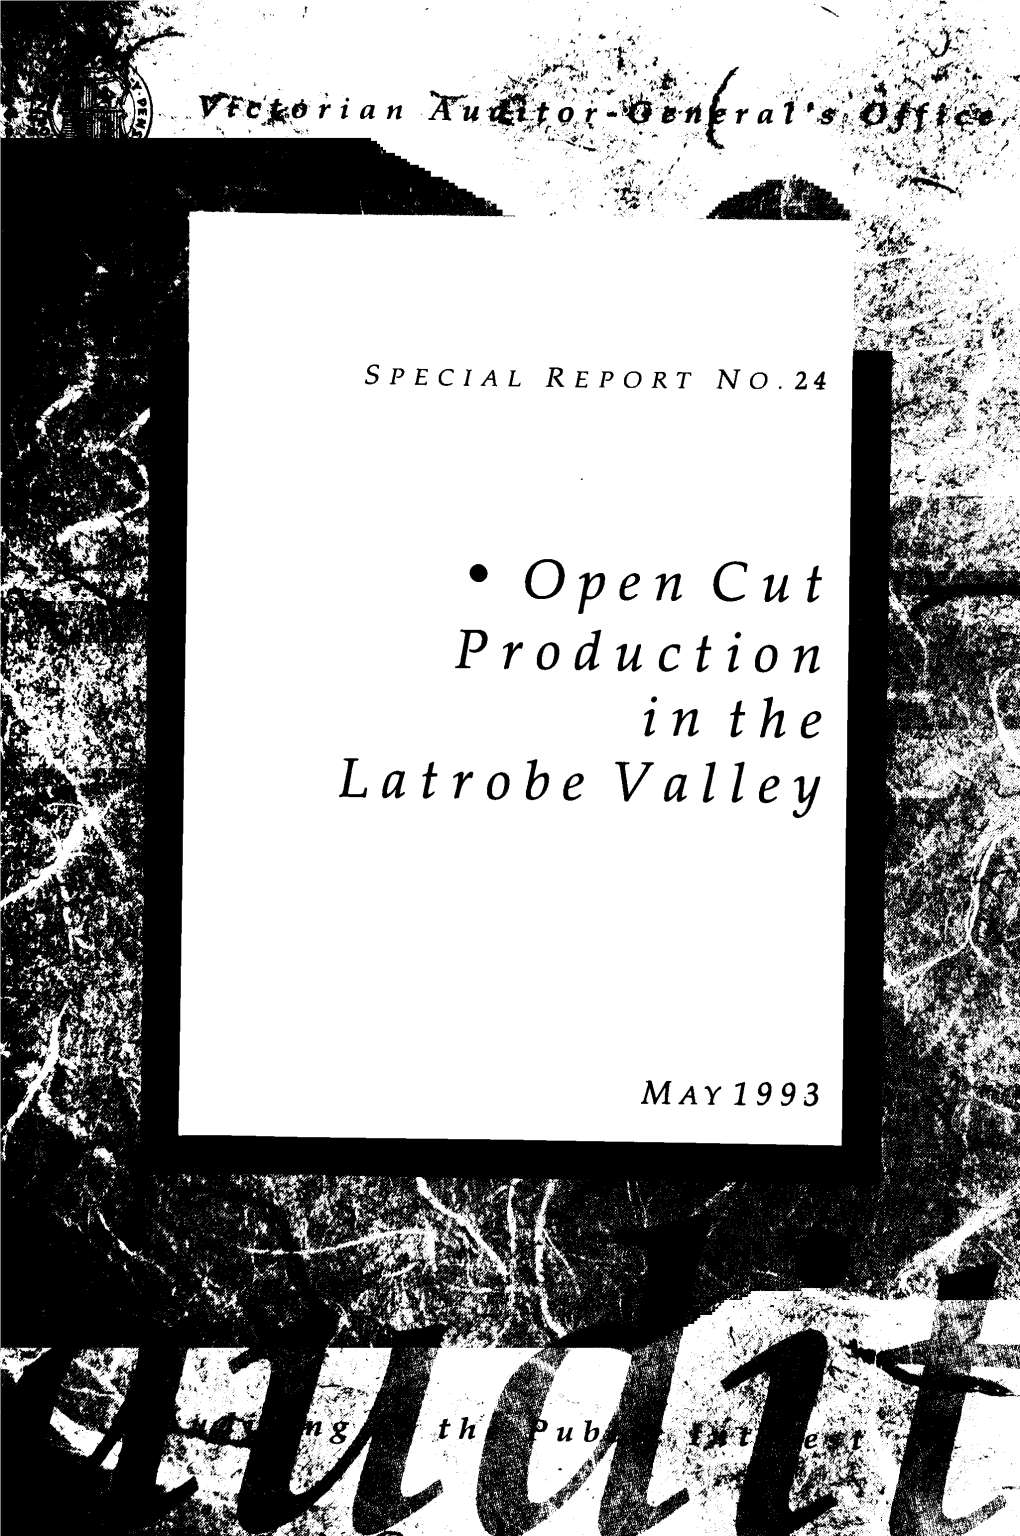 Open Cut Production in the Latrobe Valley May 1993